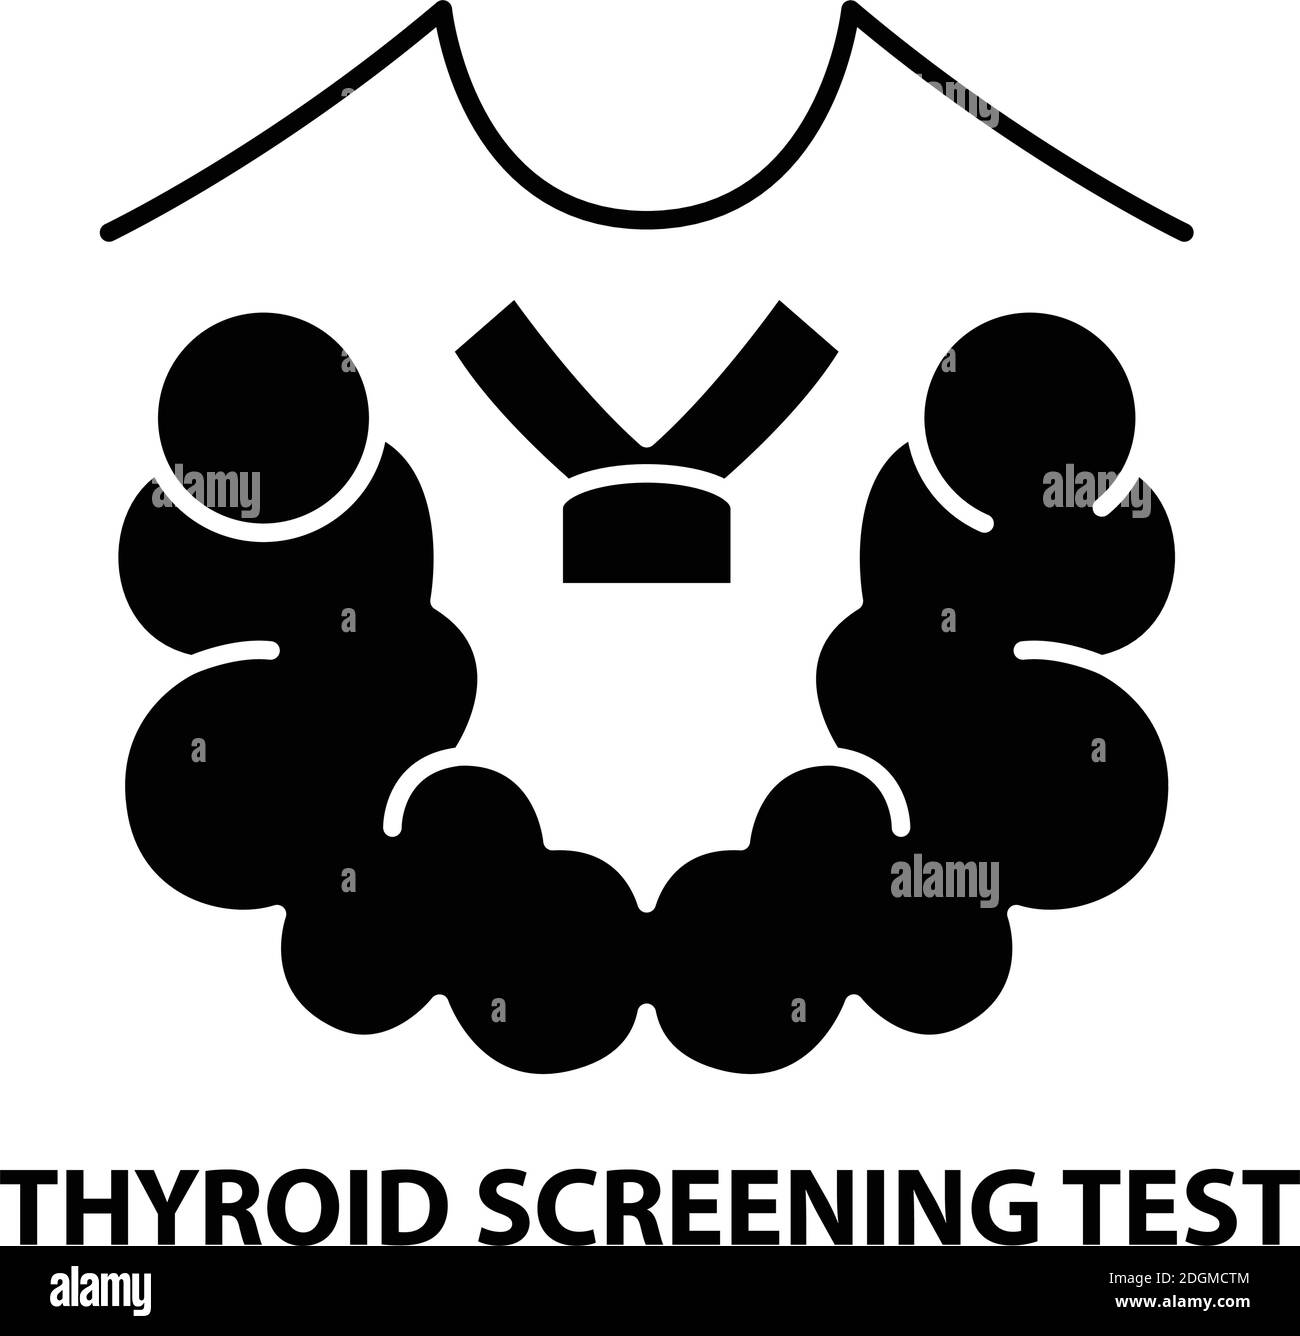 thyroid screening test icon, black vector sign with editable strokes, concept illustration Stock Vector